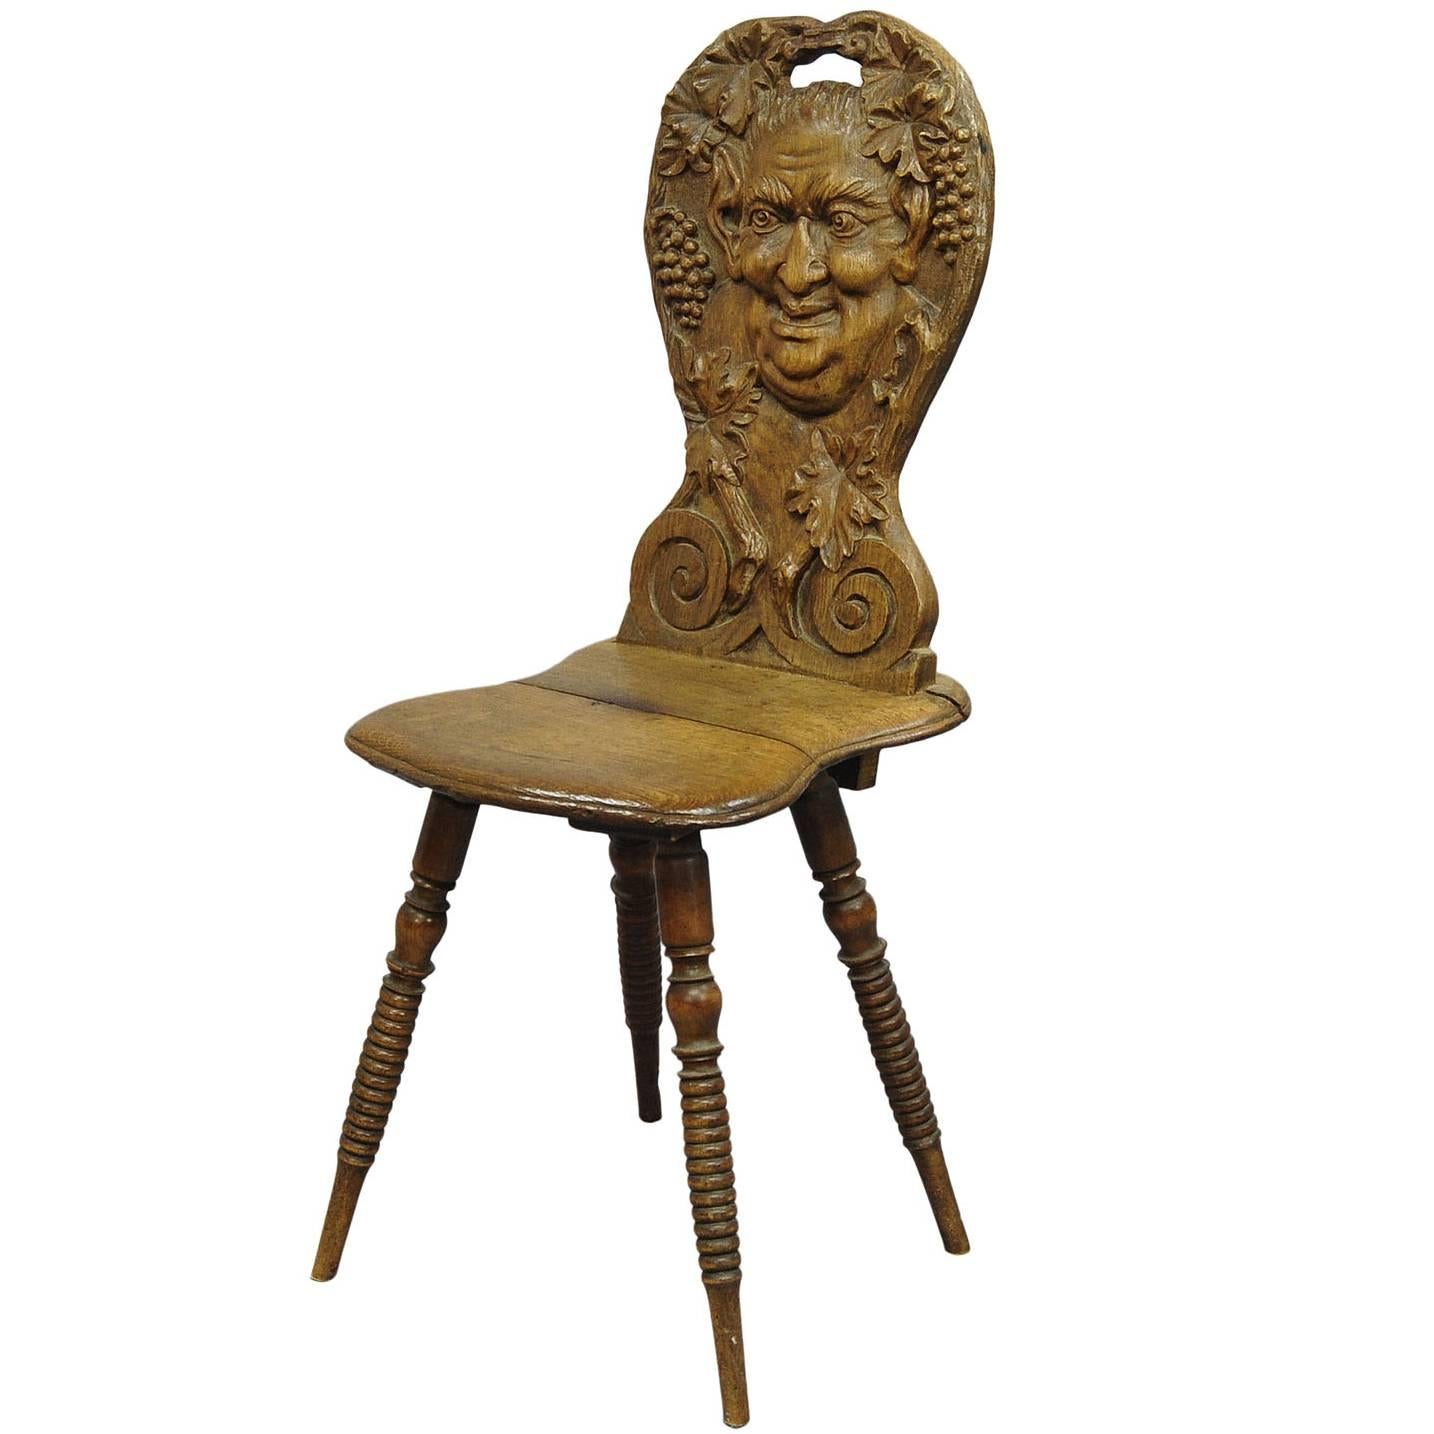 Carved Wedding Board Chair with Bacchus, circa 1900